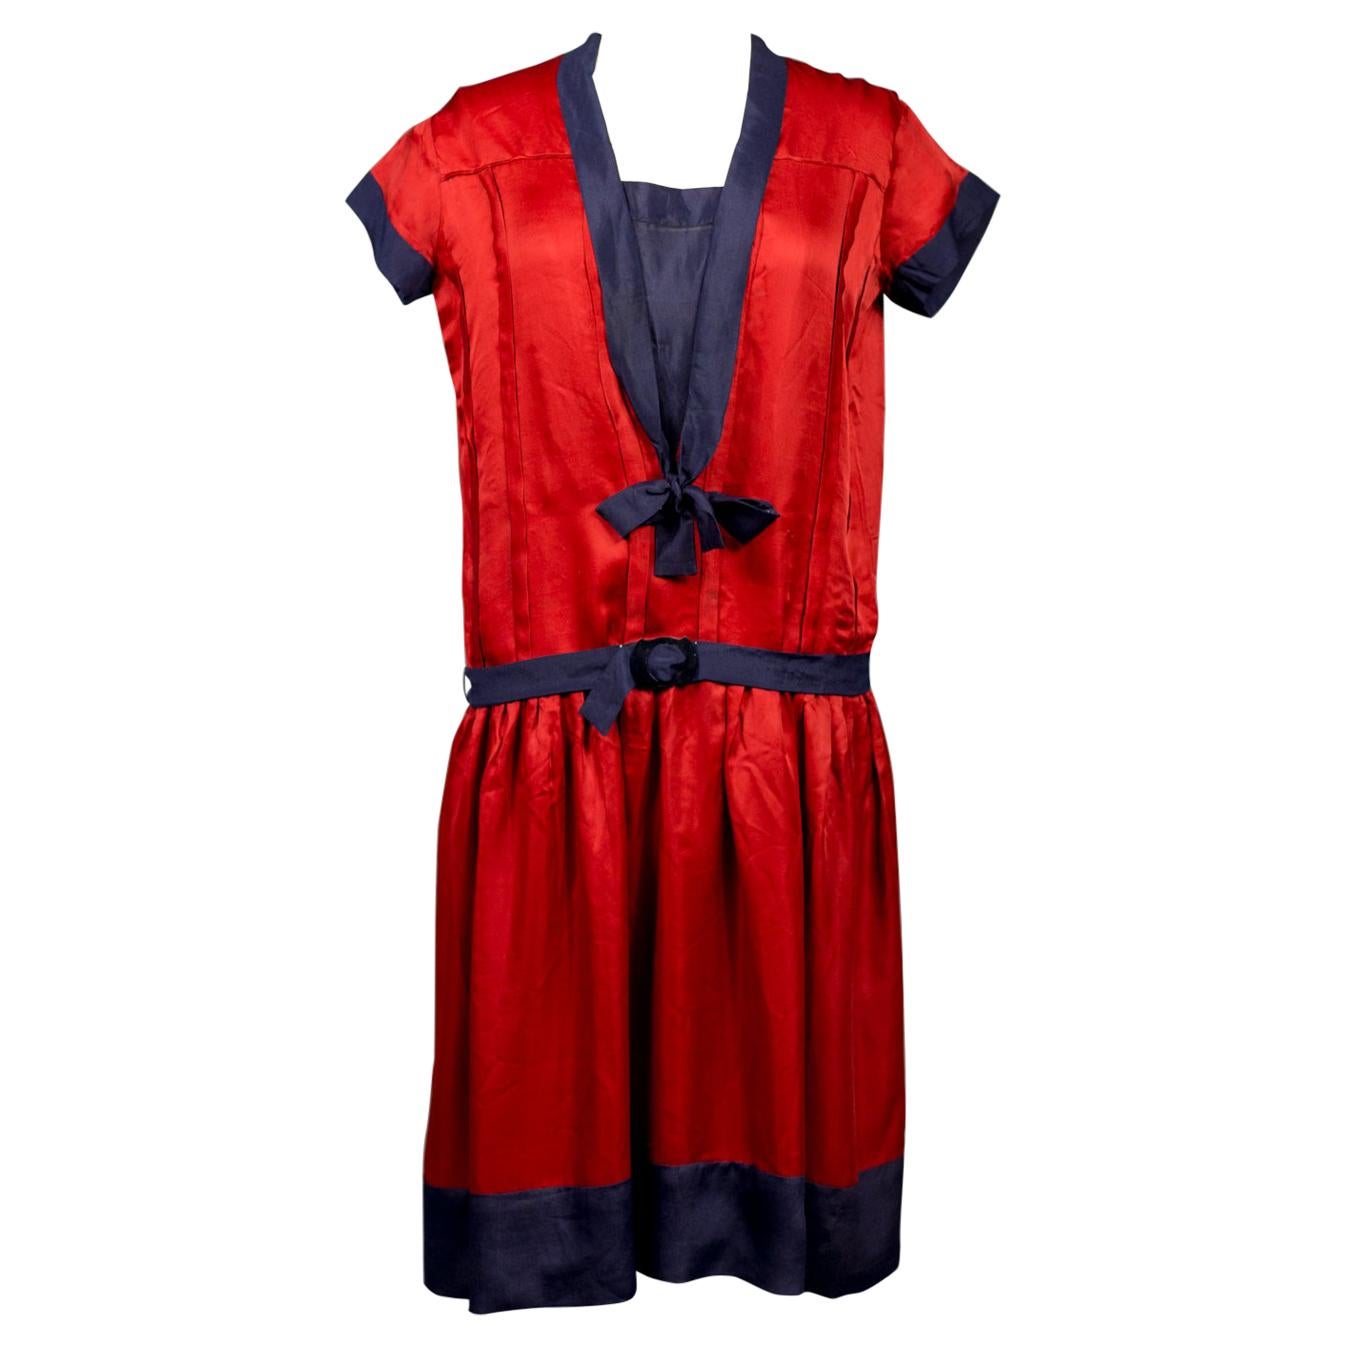 A French Patriotic Navy Dress In Satin And Silk Crepe- Circa 1920 For Sale